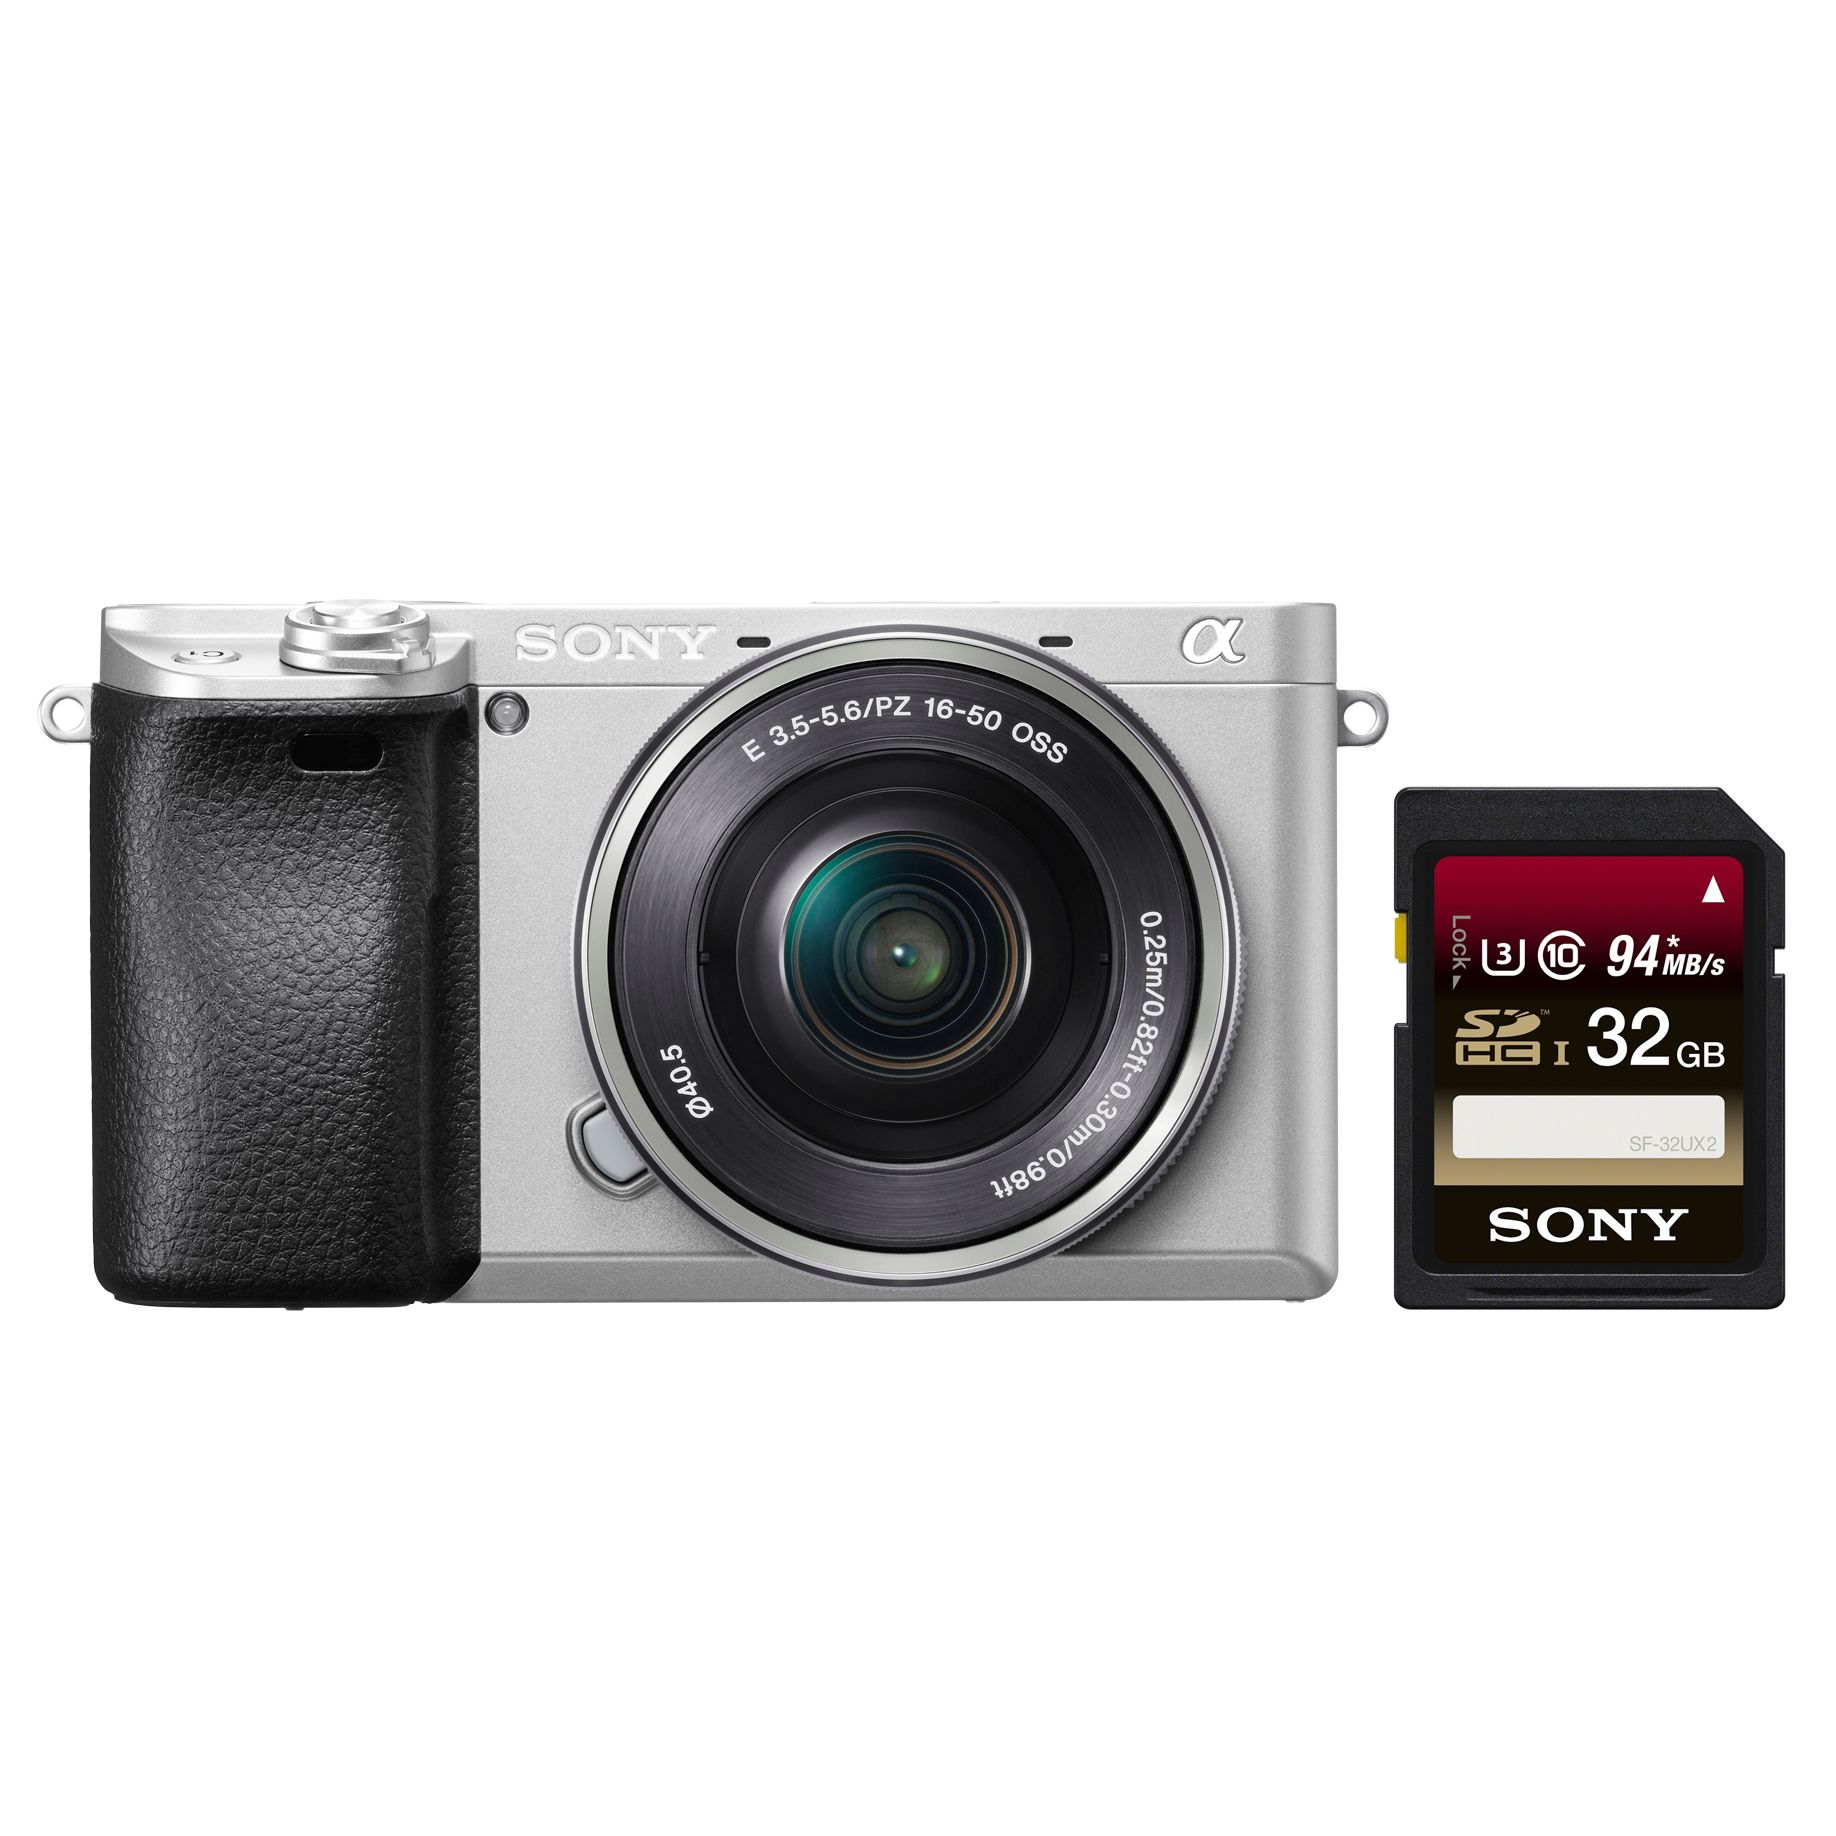 Sony A6300 Compact System Camera With 16-50mm Power Zoom Lens, 4K Ultra HD, 24.2MP, 4D Focus, Wi-Fi, NFC, OLED EVF, 3 Tilting Screen with 32GB Memory Card, Silver